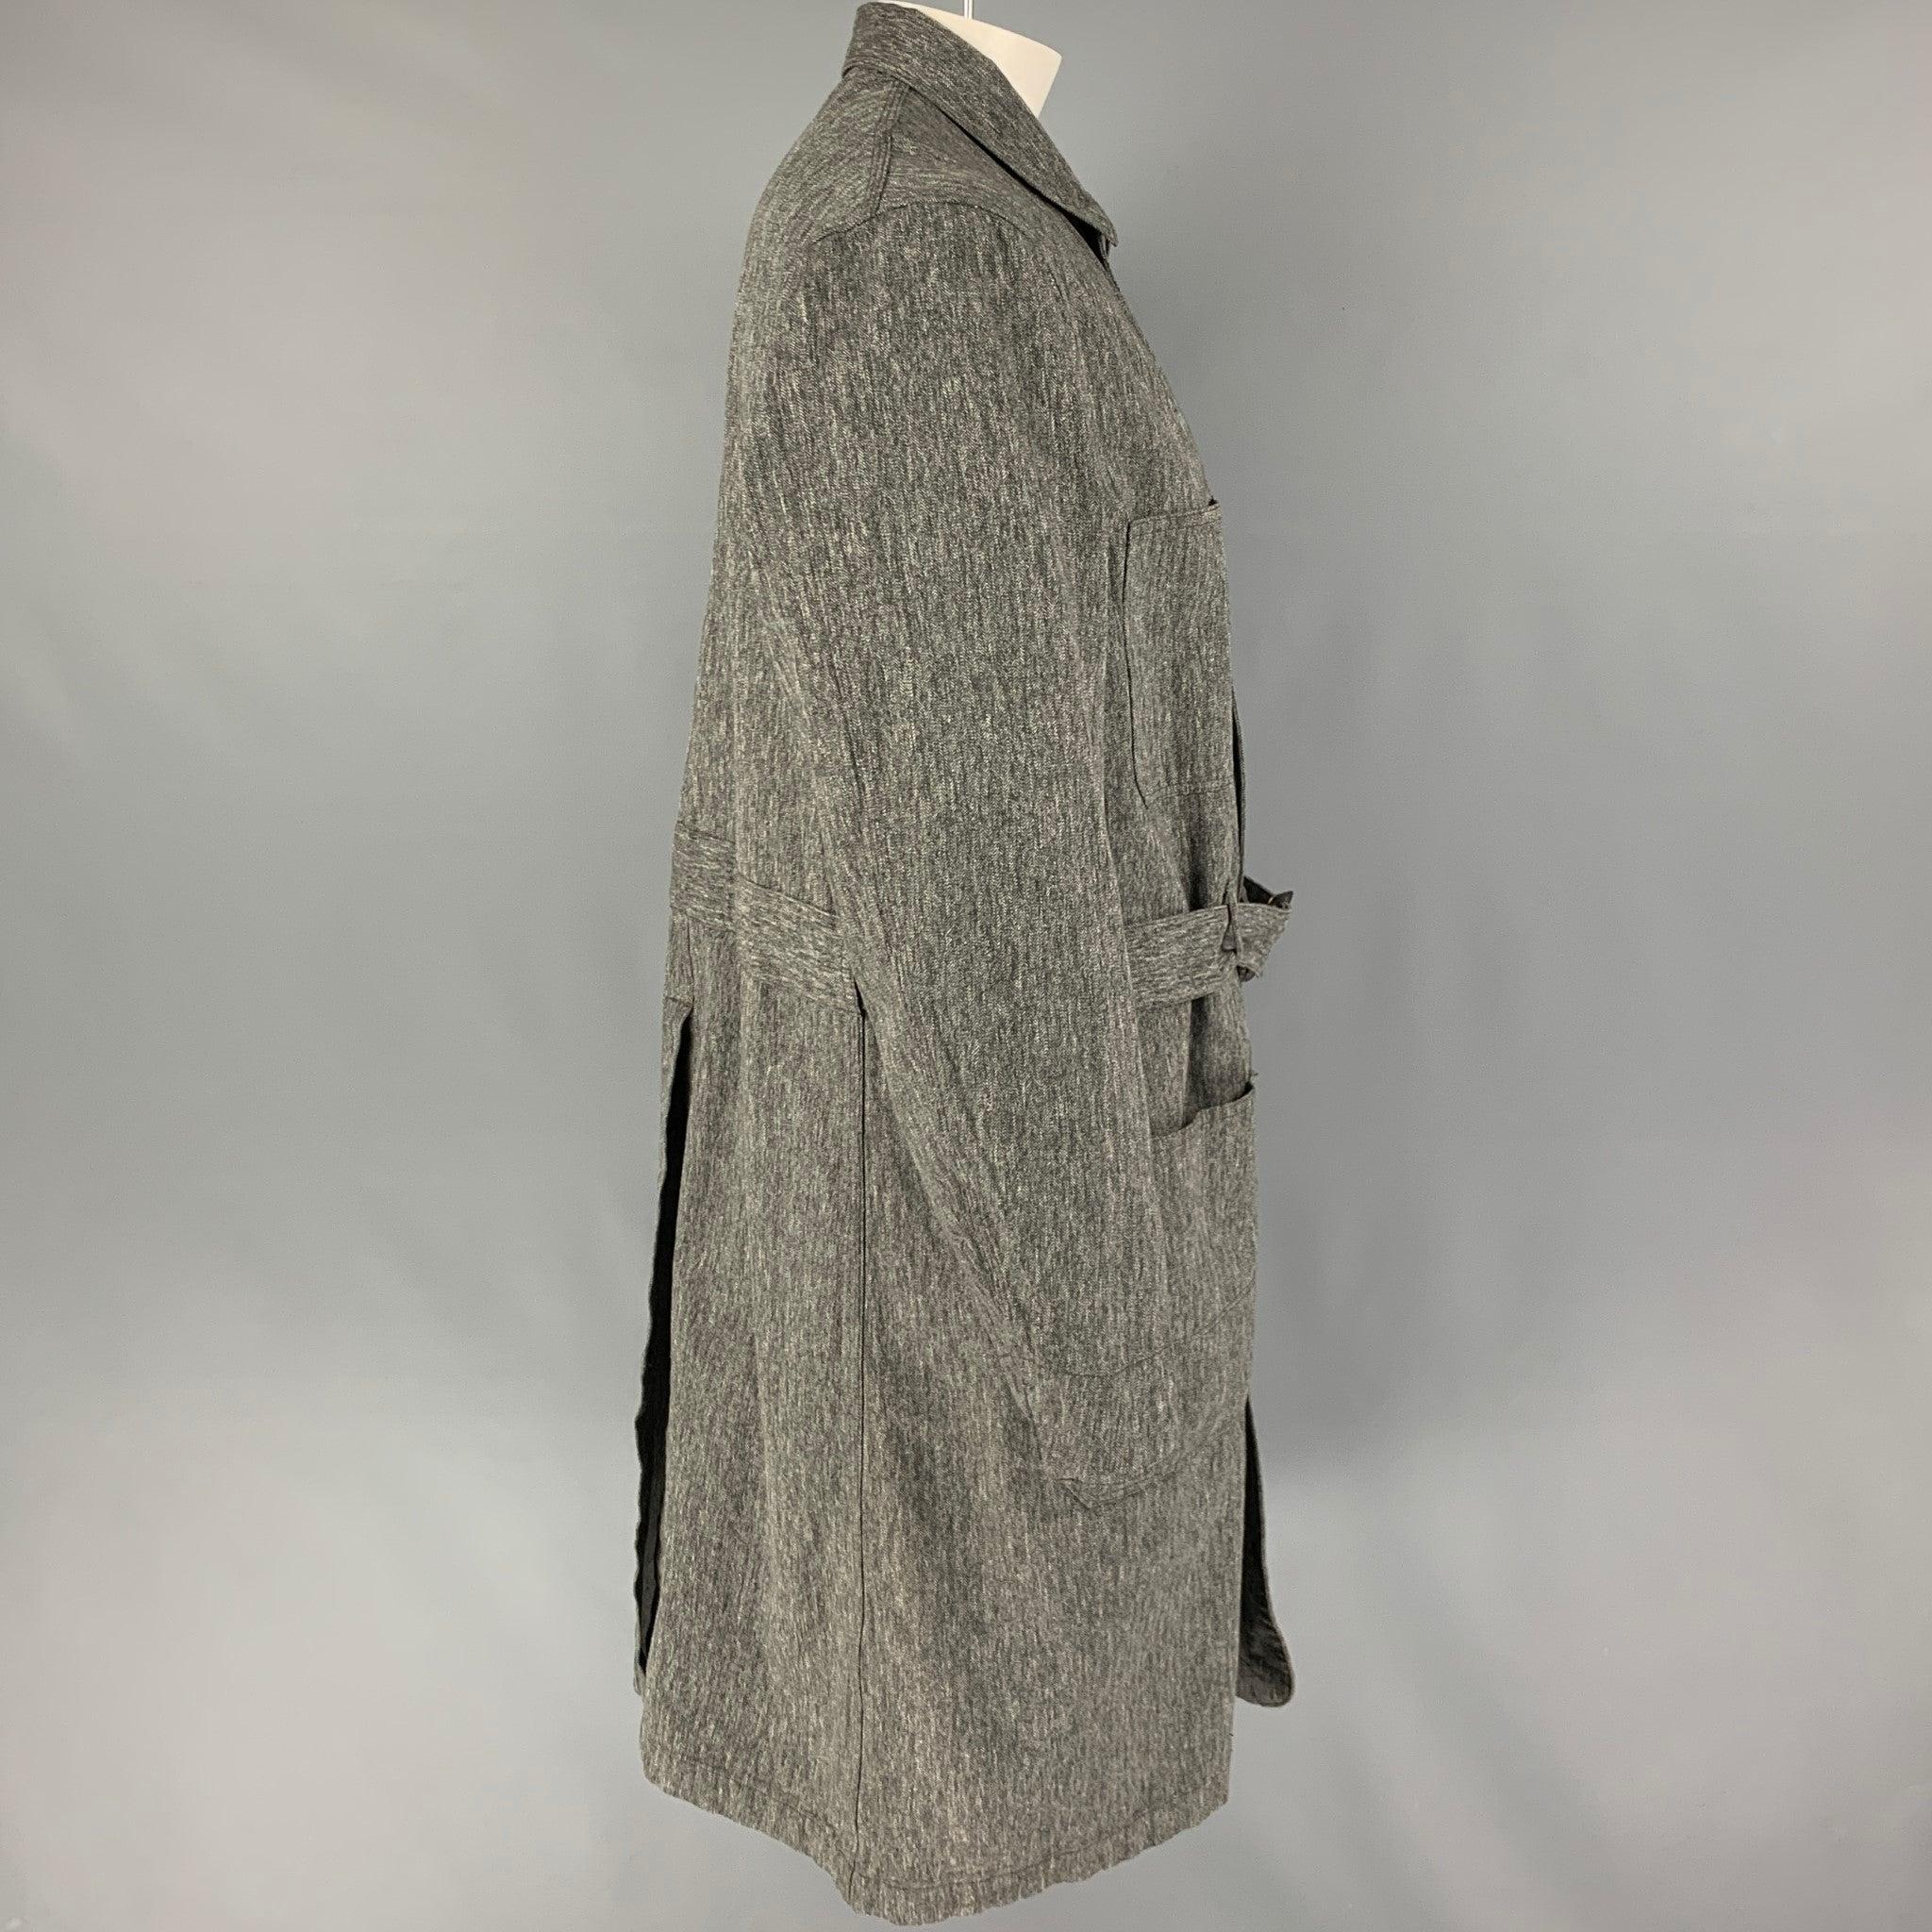 RRL by RALPH LAUREN 'Limited Edition' coat comes in a gray herringbone cotton featuring a belted style, patch pockets, single back vent, and a hidden placket closure.
Excellent
Pre-Owned Condition. 

Marked:  XL 

Measurements: 
 
Shoulder: 19.5